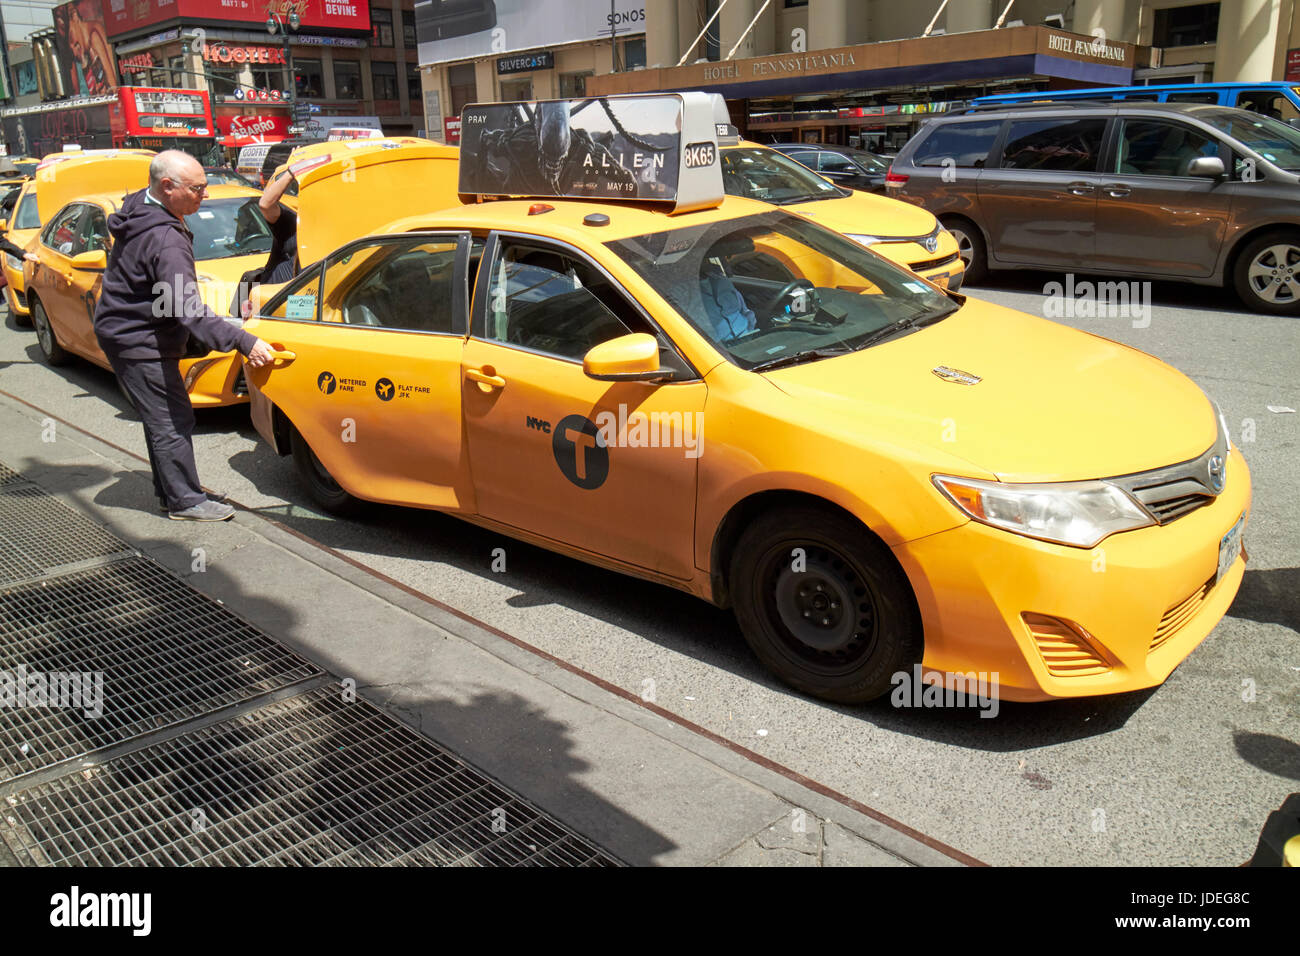 man getting in to yellow cab stop at taxi rank on 7th avenue New York City USA Stock Photo